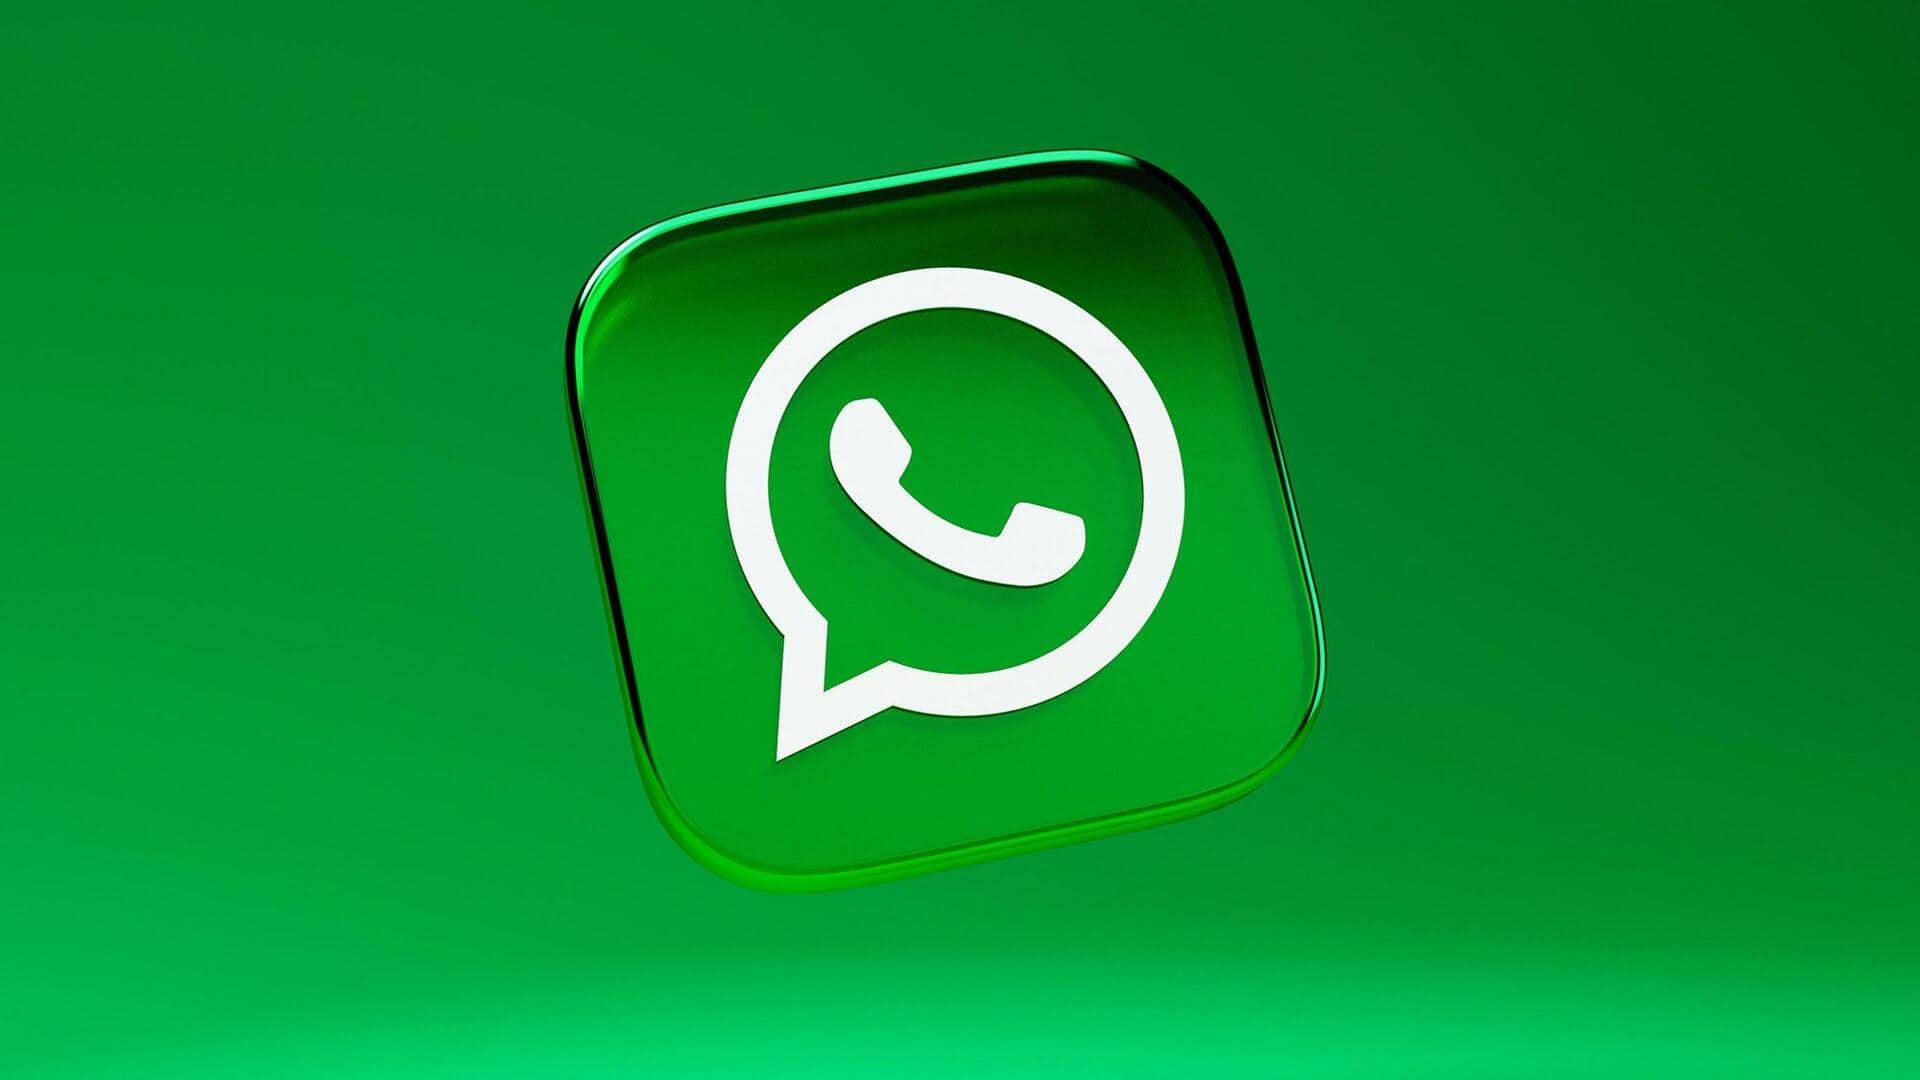 WhatsApp working on account limitation feature to promote responsible usage